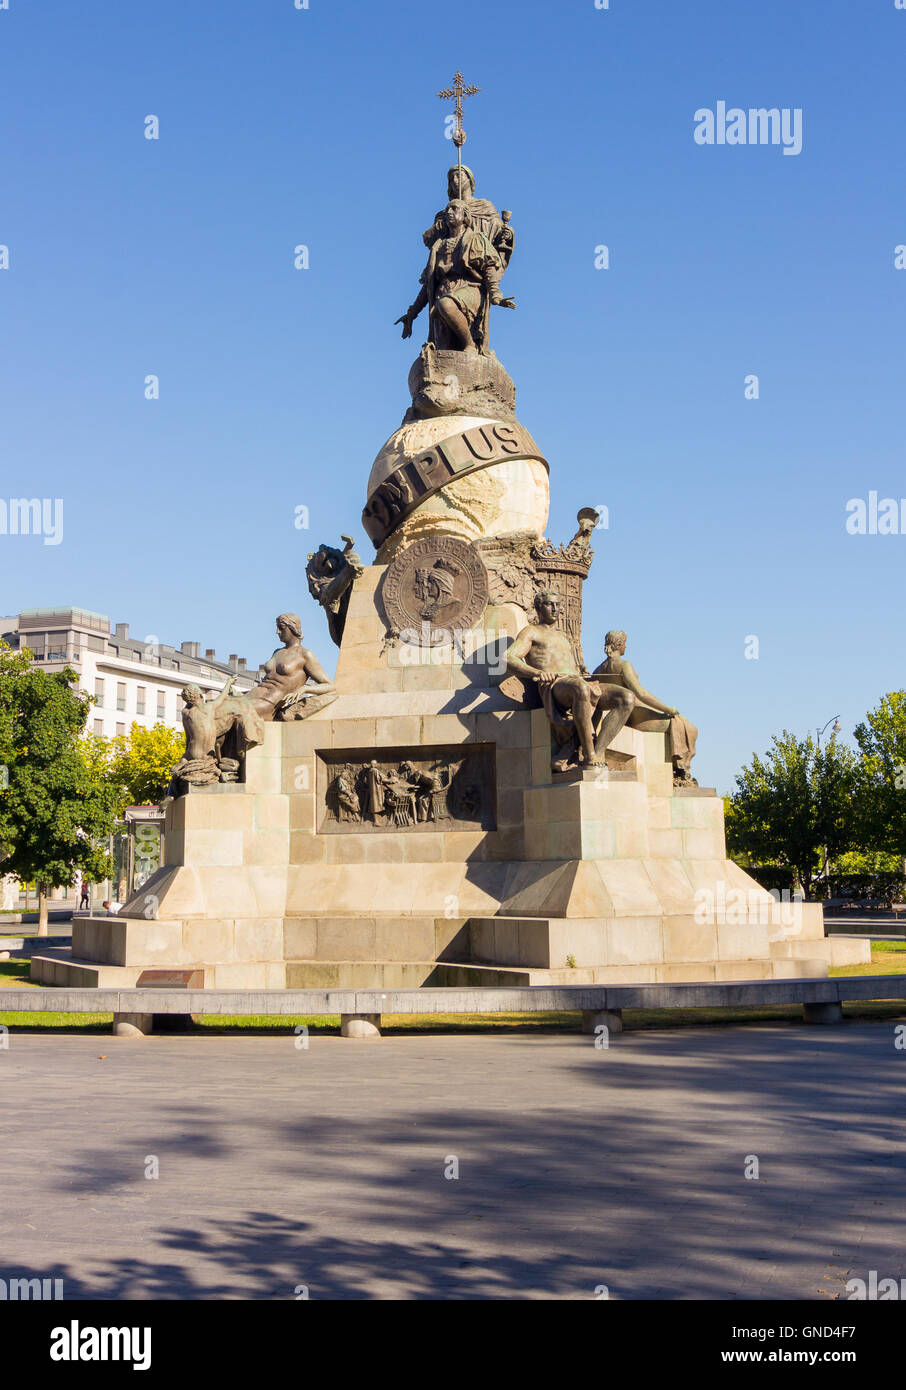 Statue monument to Columbus in Valladolid, Spain Stock Photo